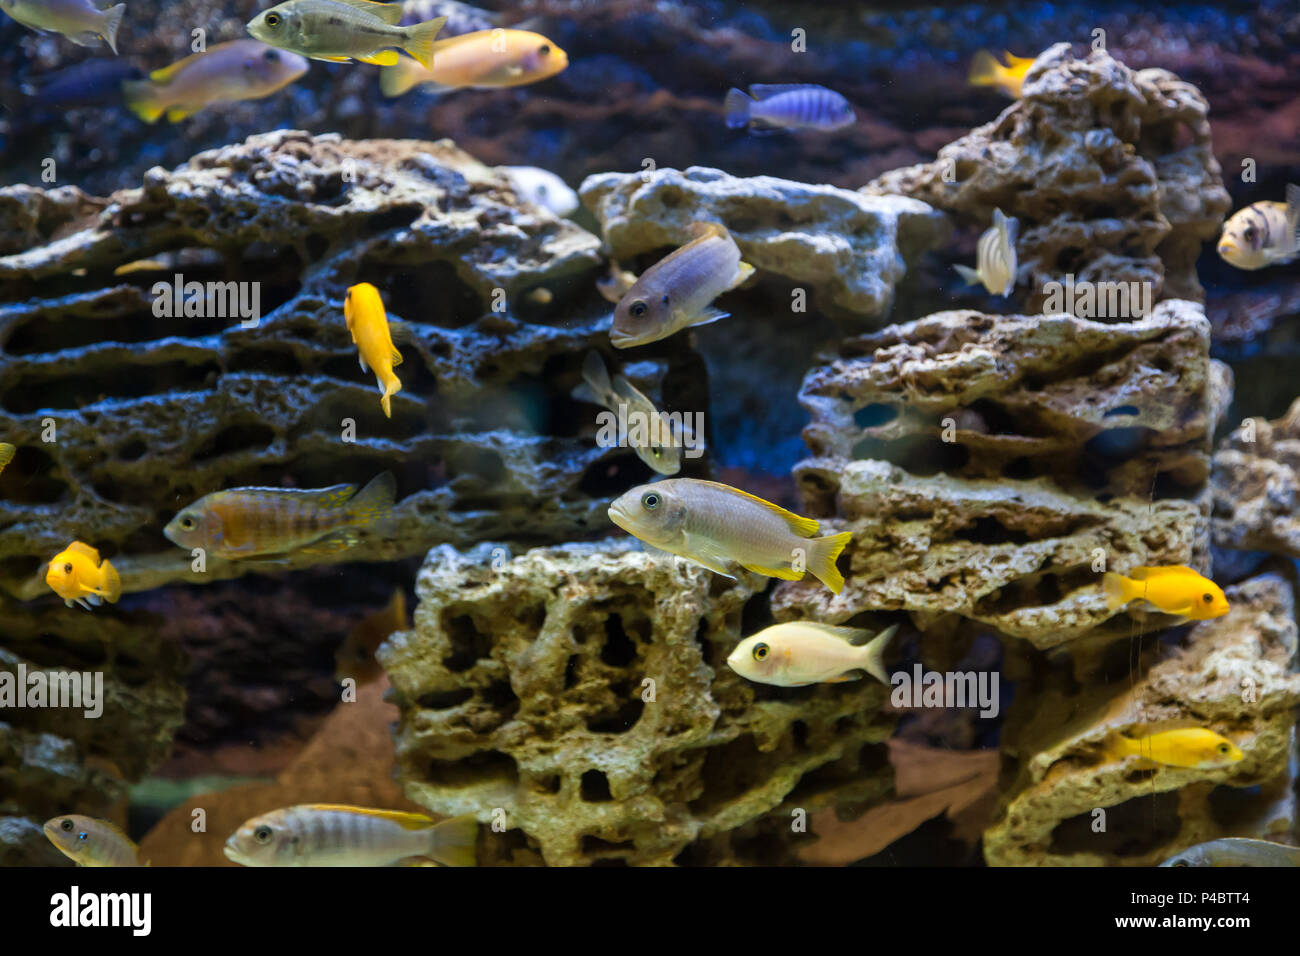 Close-up of  many fishes: aphyocharax rathbuni  floating and looking at the camera in an aquarium Stock Photo